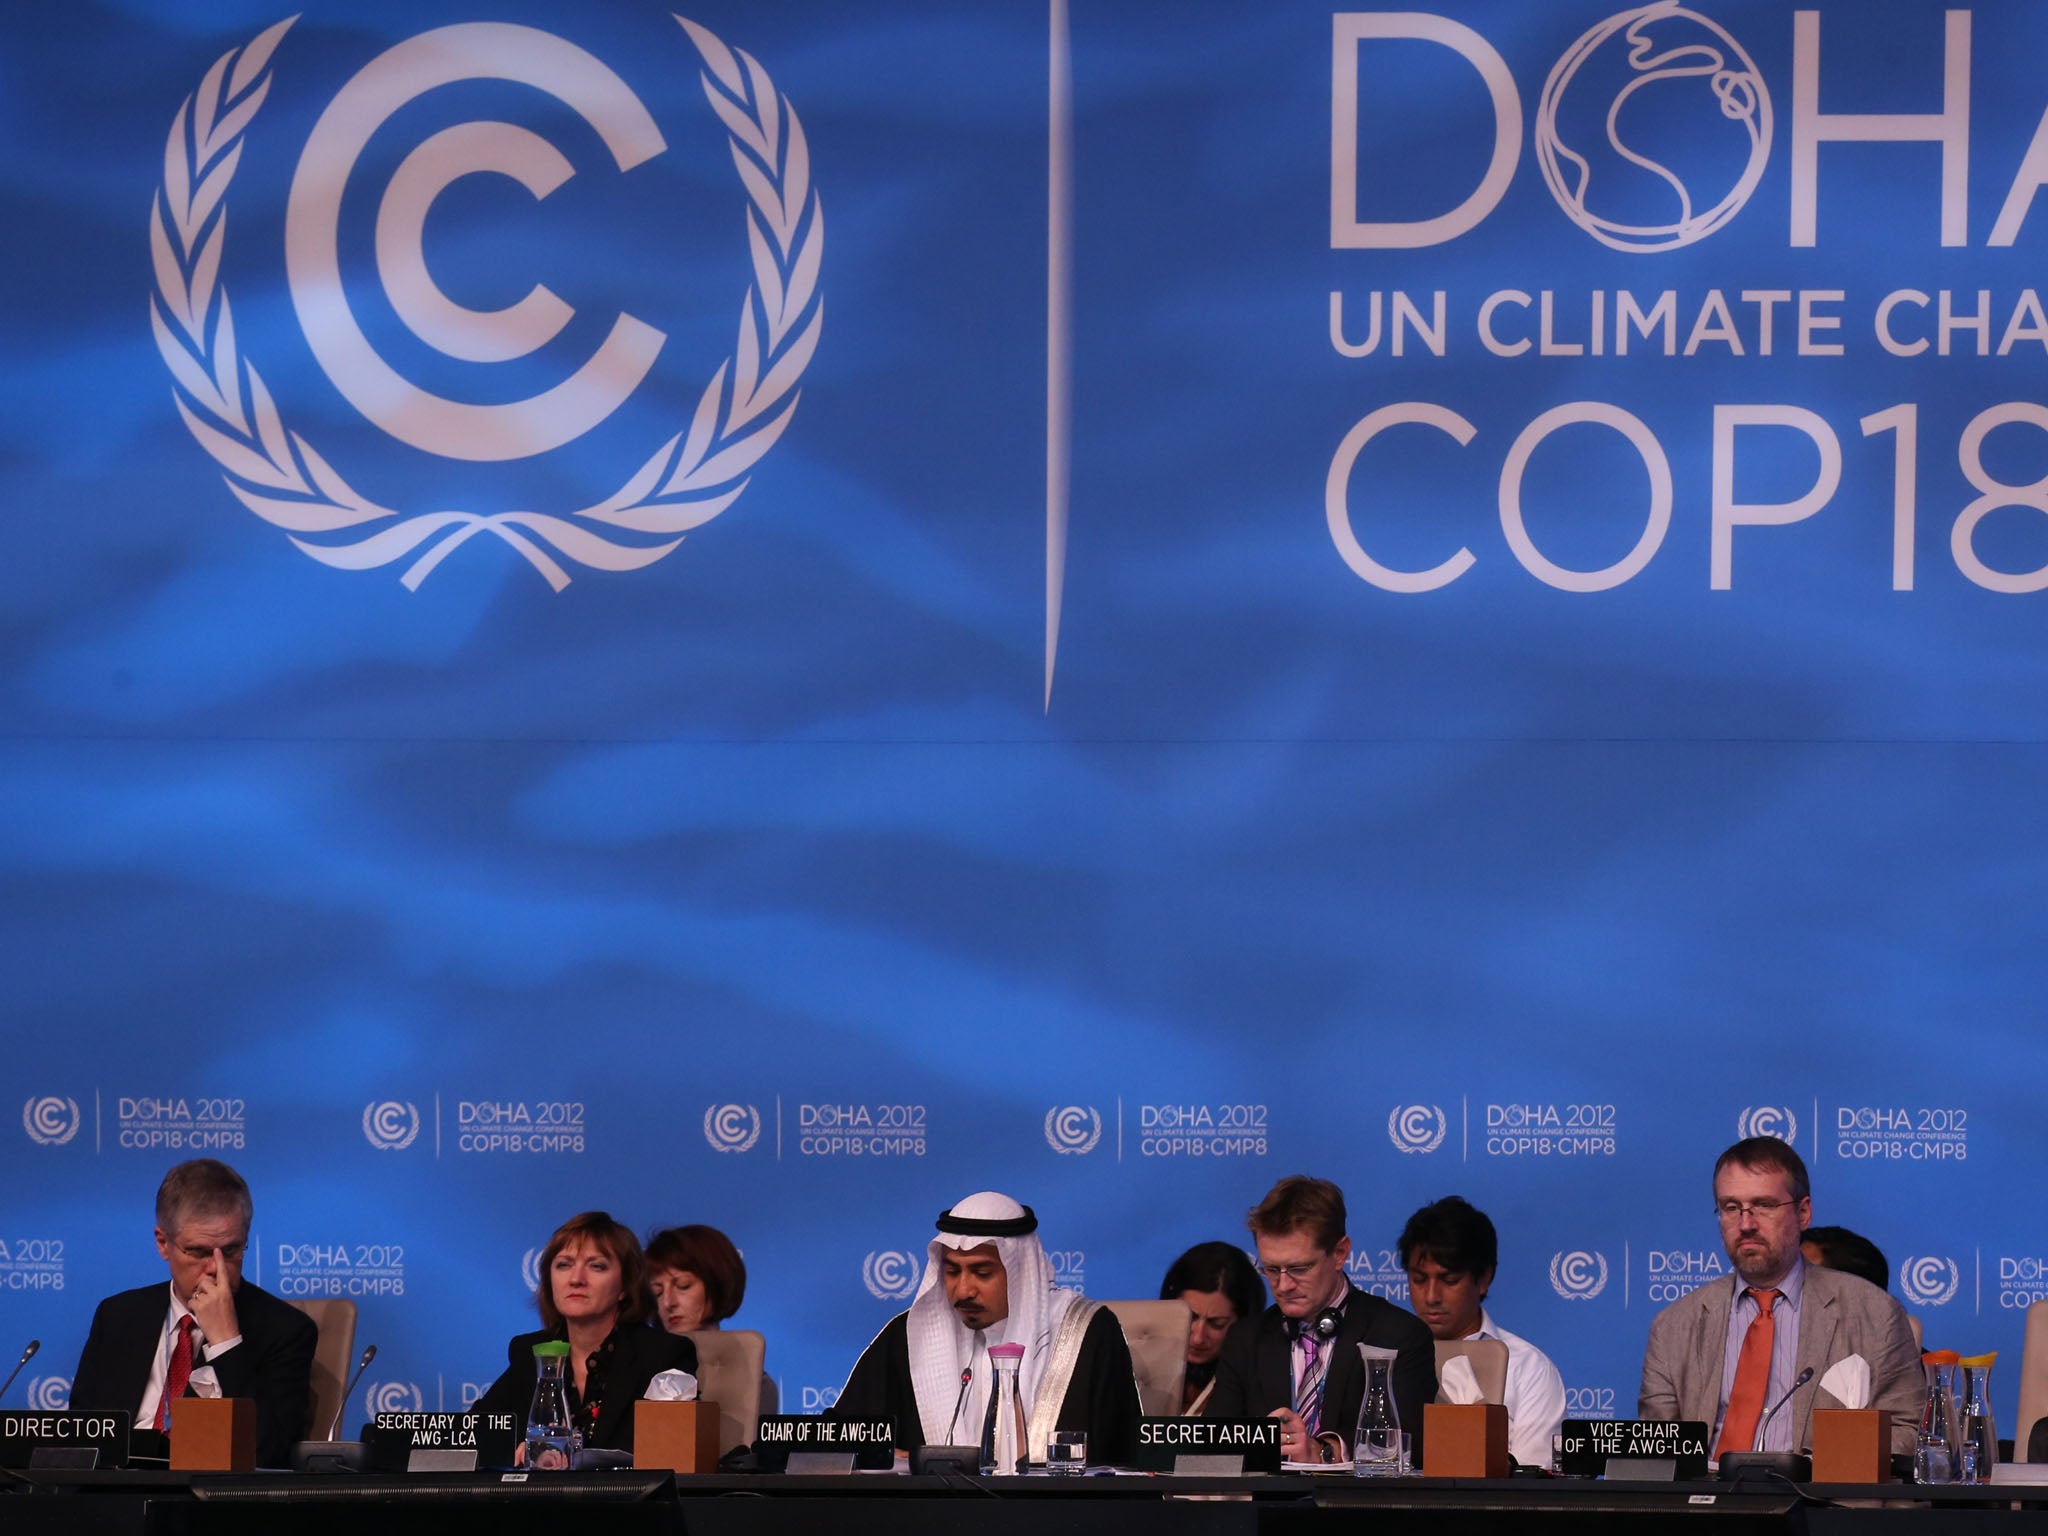 The final day of the Global Climate Change conference in Doha